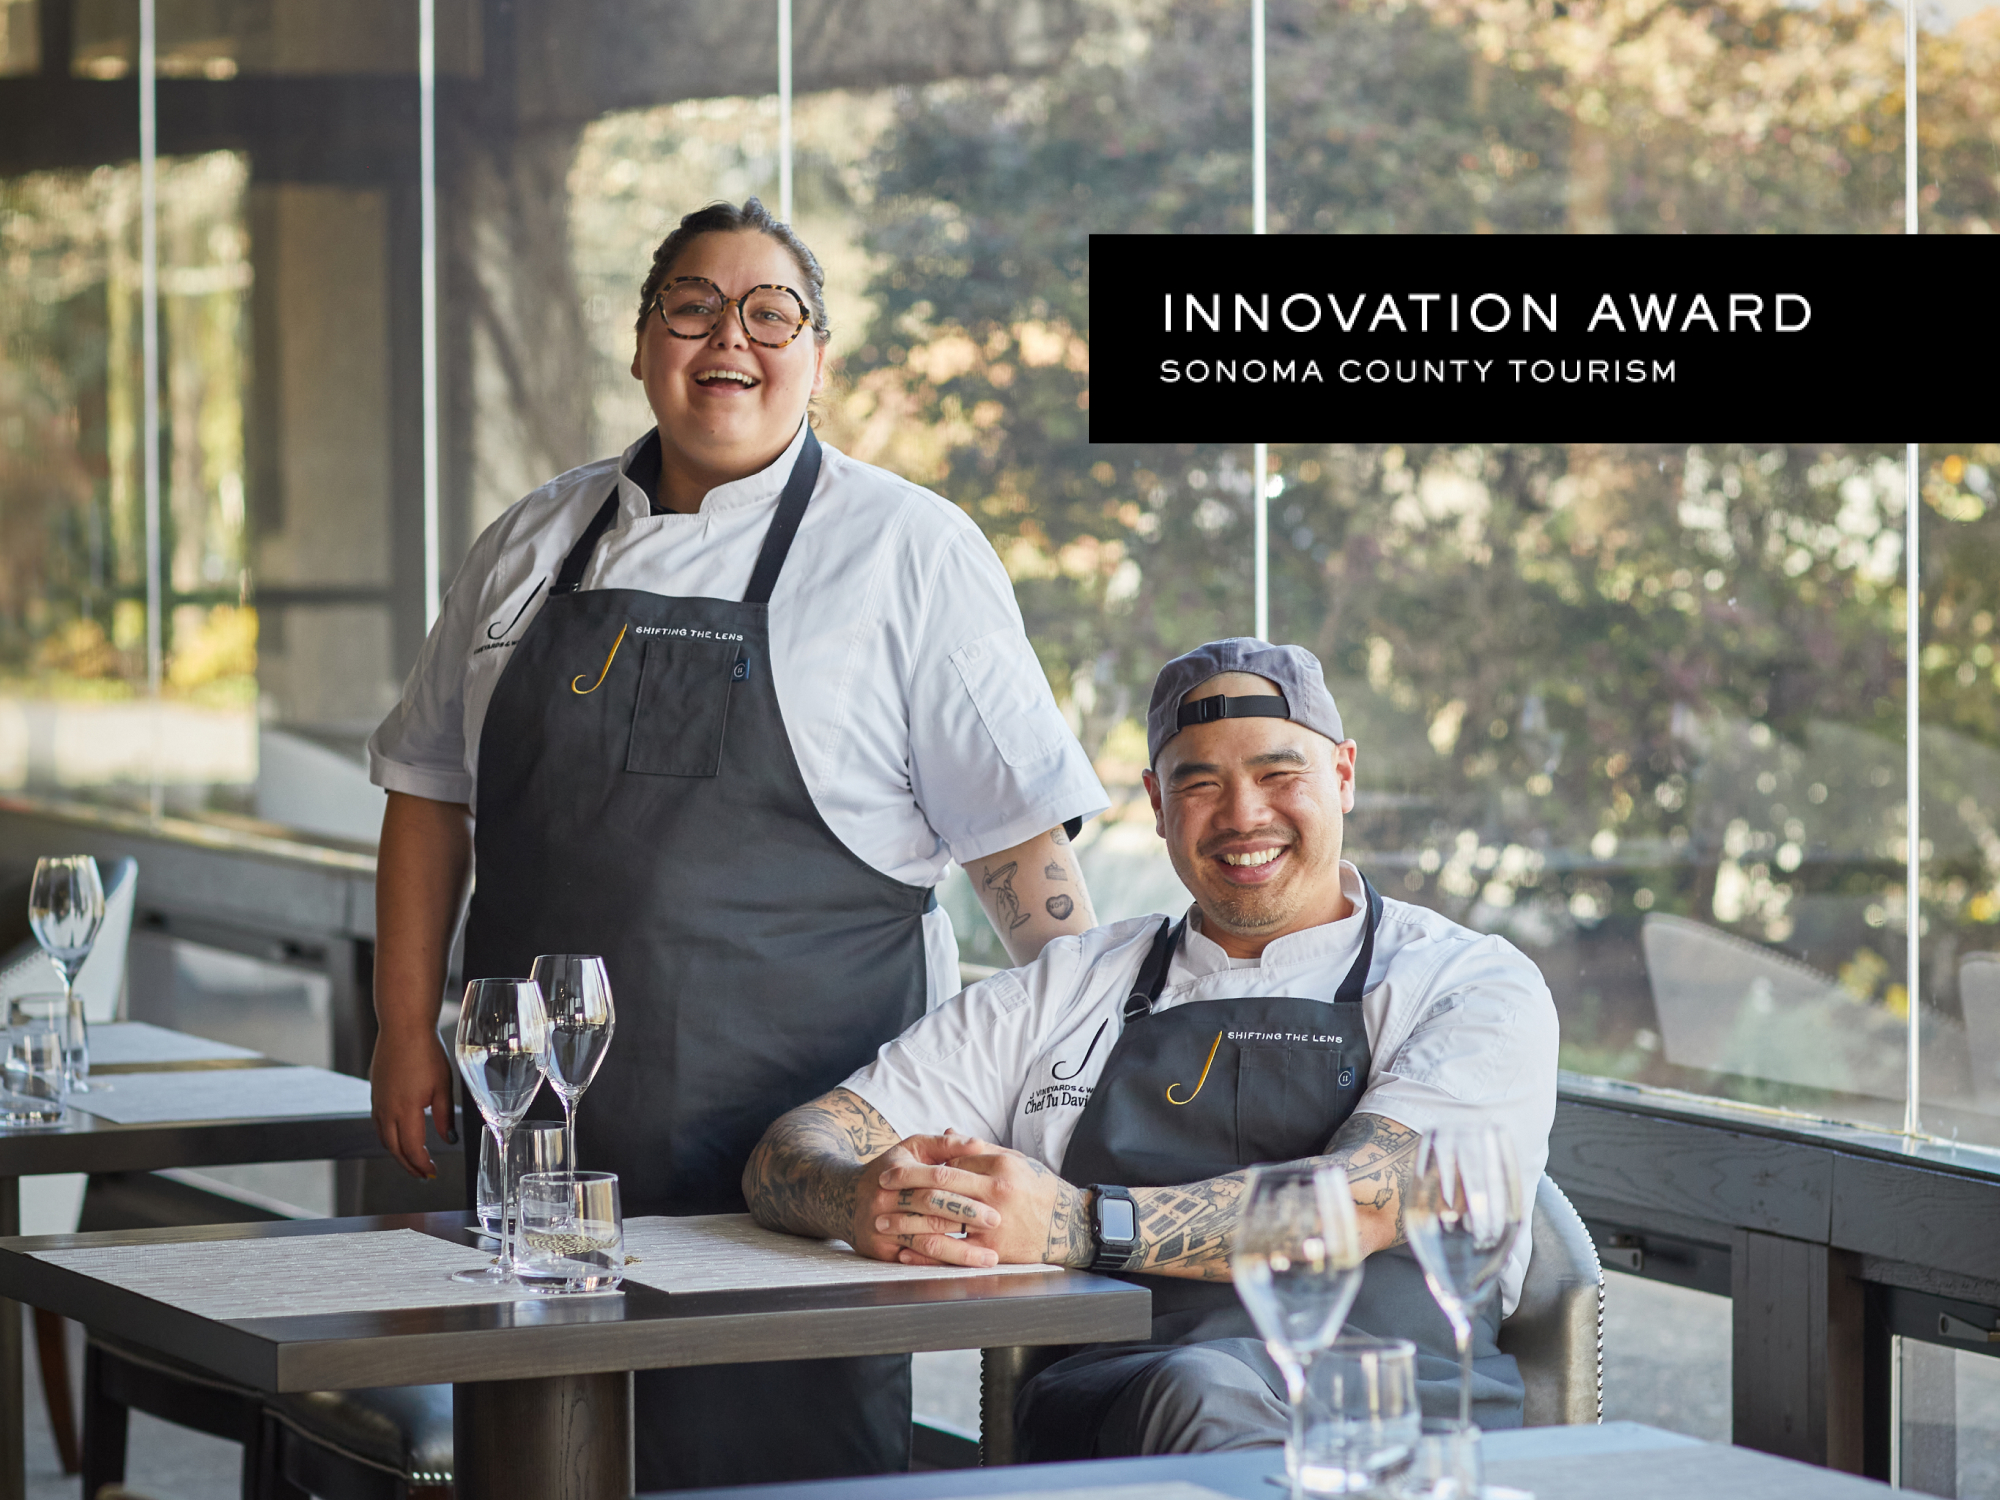 J Vineyards and Winery wins the Sonoma County Tourism Innovation Award